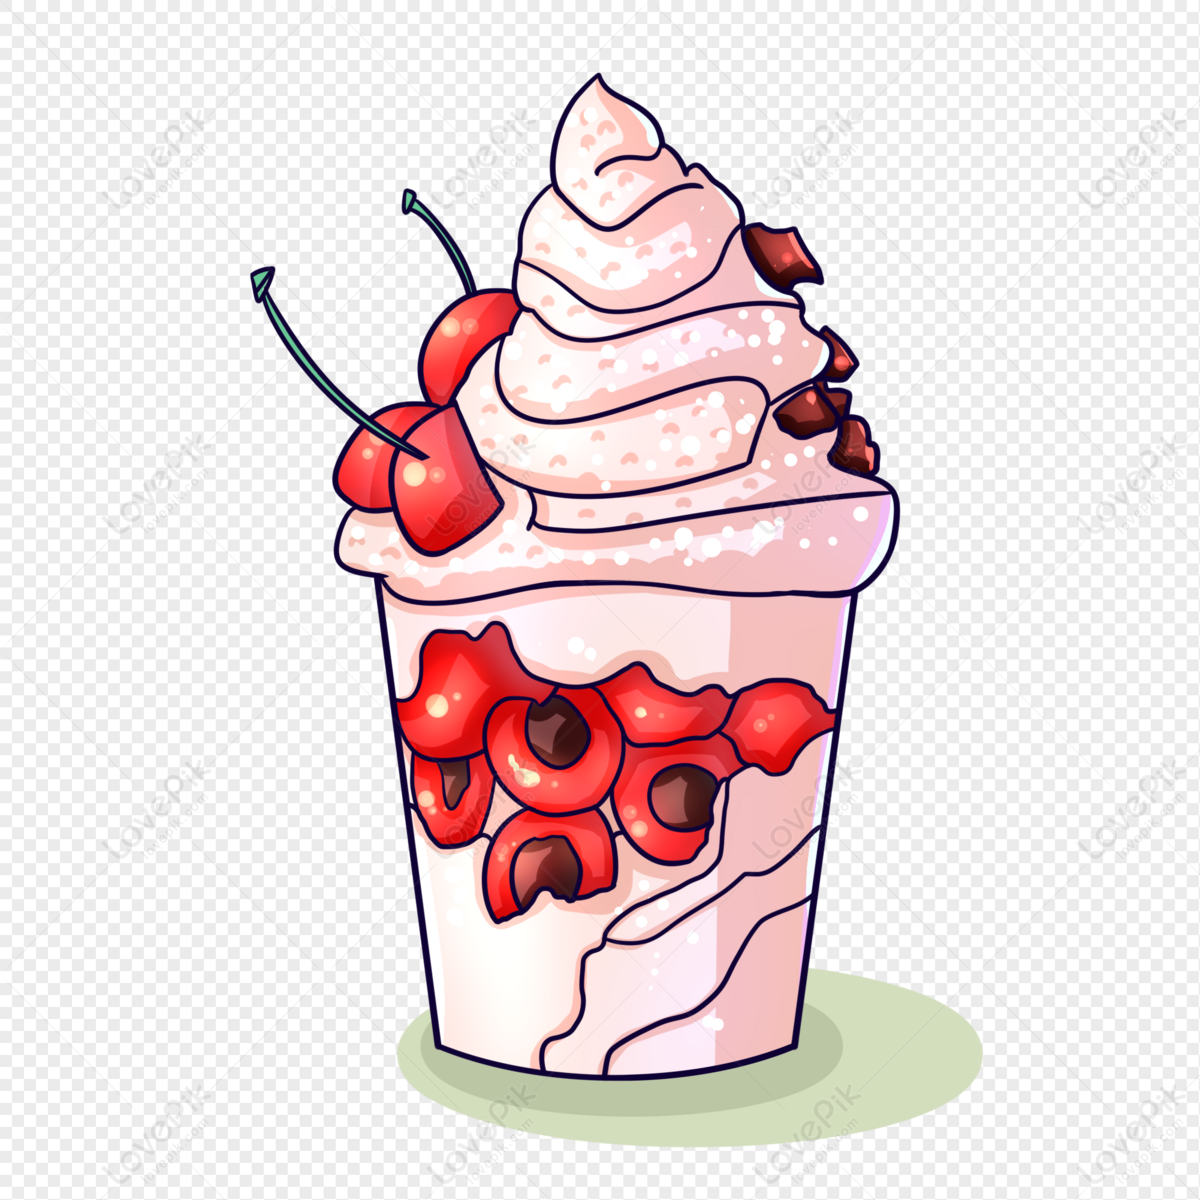 Cartoon Ice Cream Illustration PNG Picture And Clipart Image For Free  Download - Lovepik | 401425545